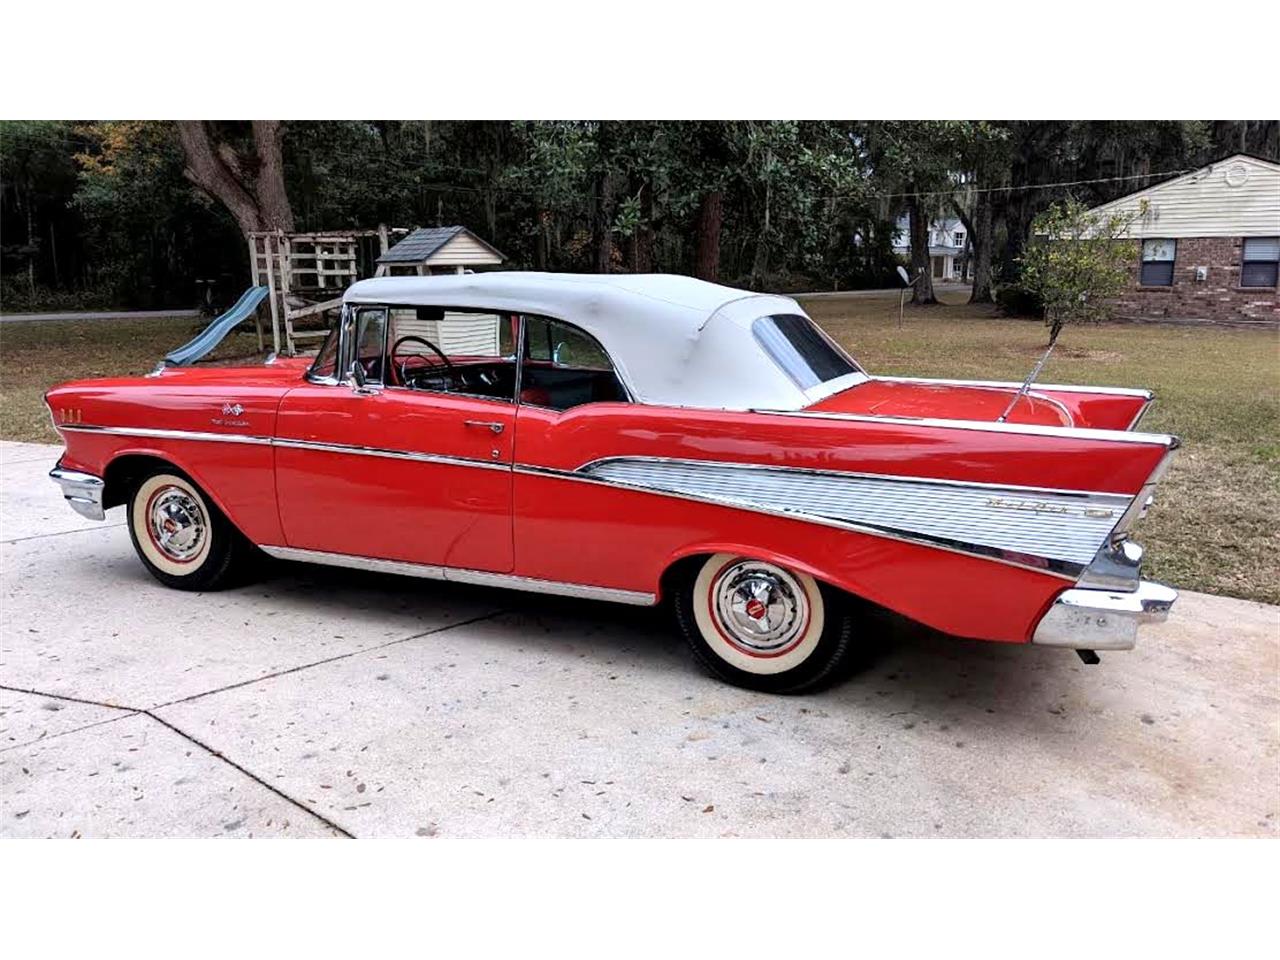 Chevrolet Bel Air V8 Injection Convertible 1957 classiccars 